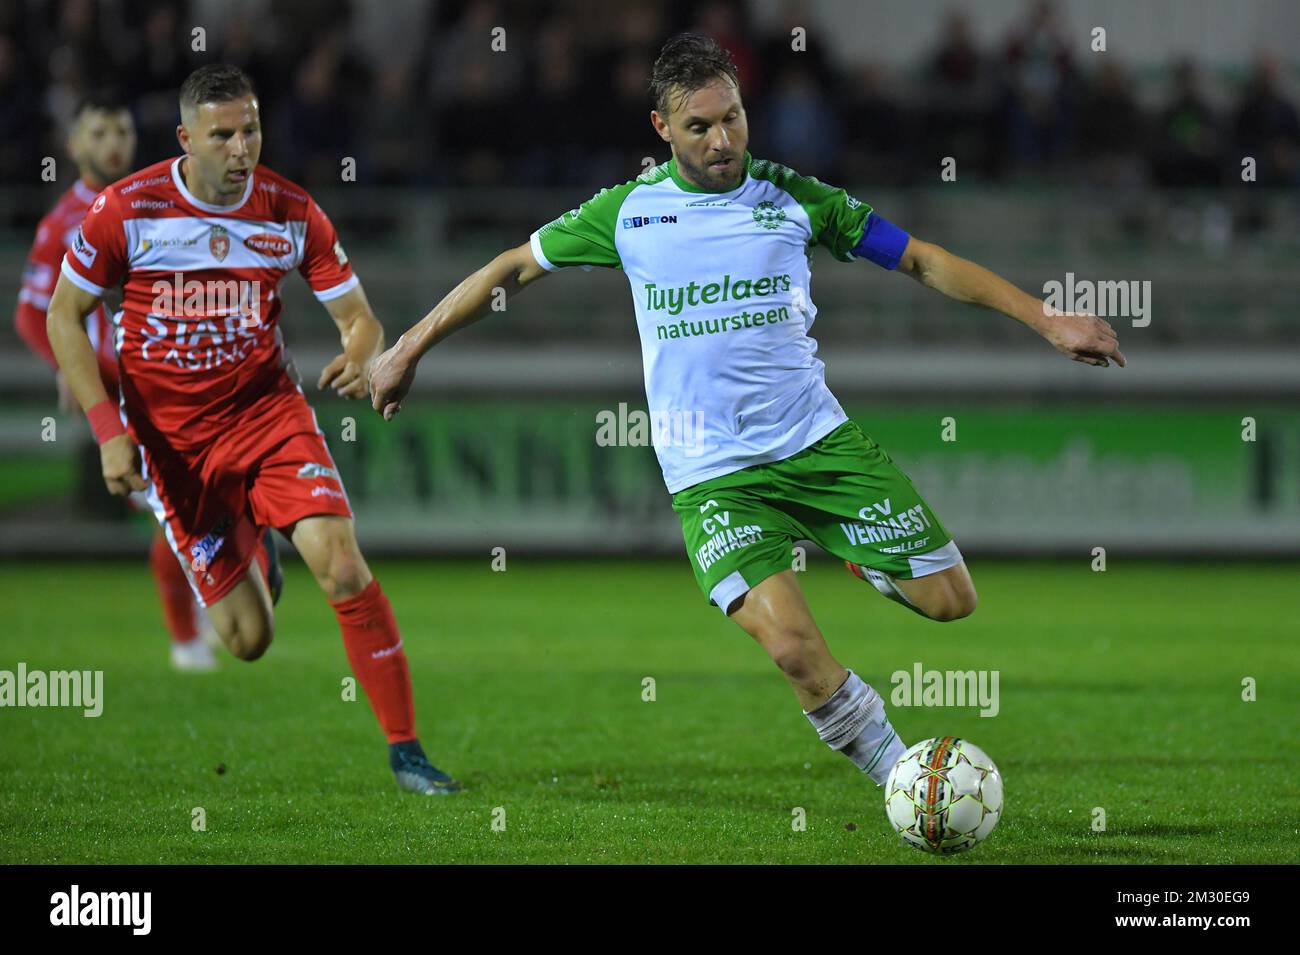 Dessel's Kevin Janssens and Mouscron's Nemanja Antonov fight for the ball during a soccer game between Dessel Sport (1Am) and Royal Excel Mouscron, Wednesday 25 September 2019 in Dessel, in the 1/16th final of the 'Croky Cup' Belgian cup. BELGA PHOTO LUC CLAESSEN Stock Photo